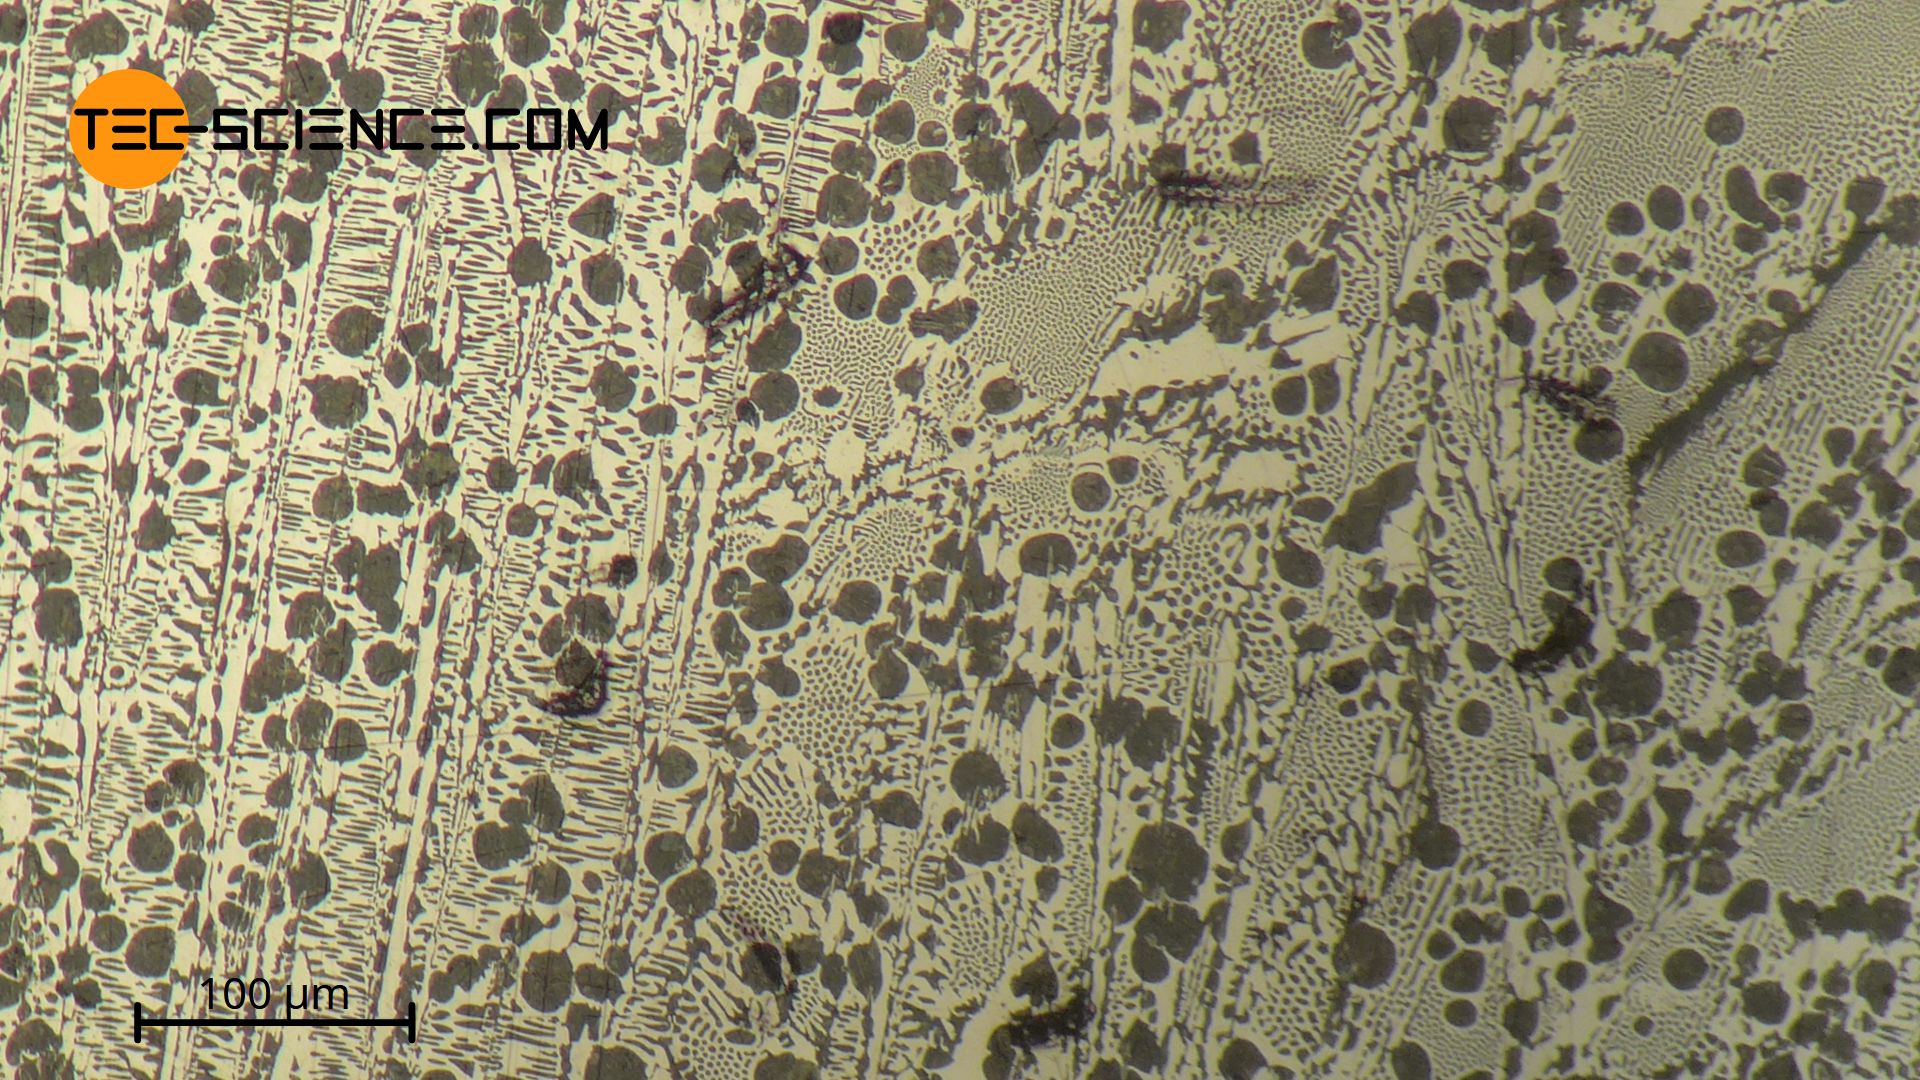 Micrograph of hypoeutectic cast iron with a carbon content of 3.85 %.